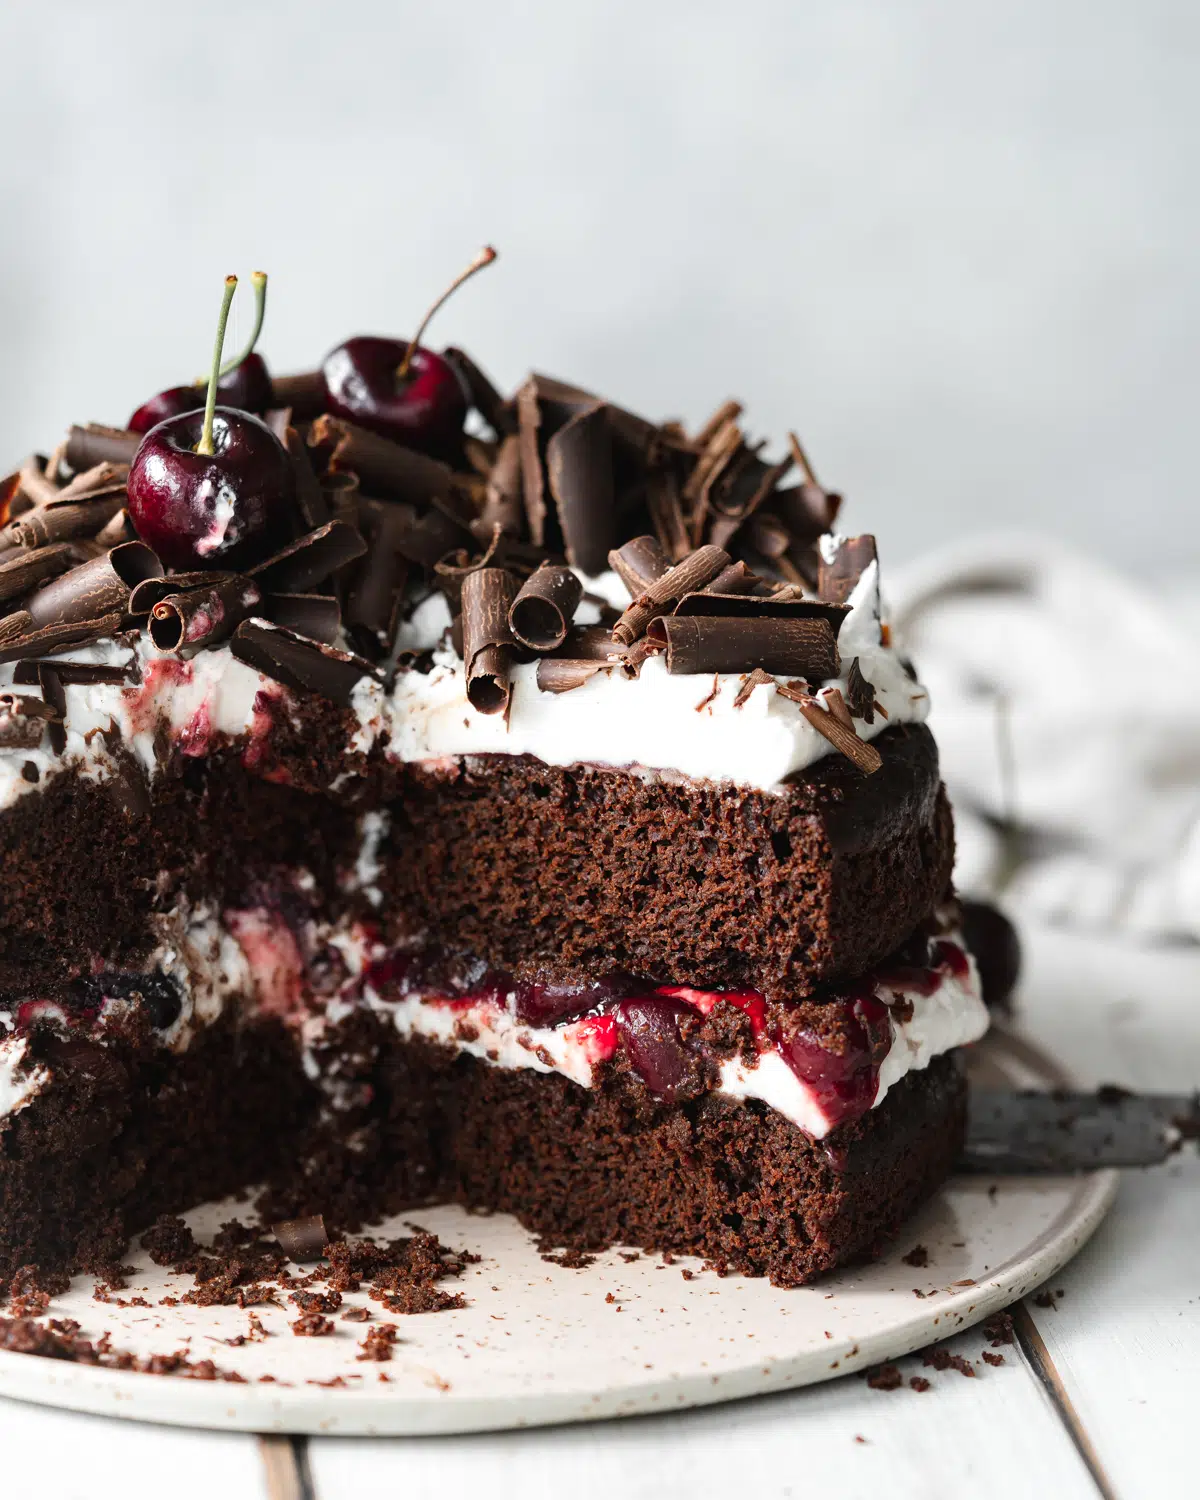 layered black forest cake with chocolate curls and cherries on top, on a white wooden surface.